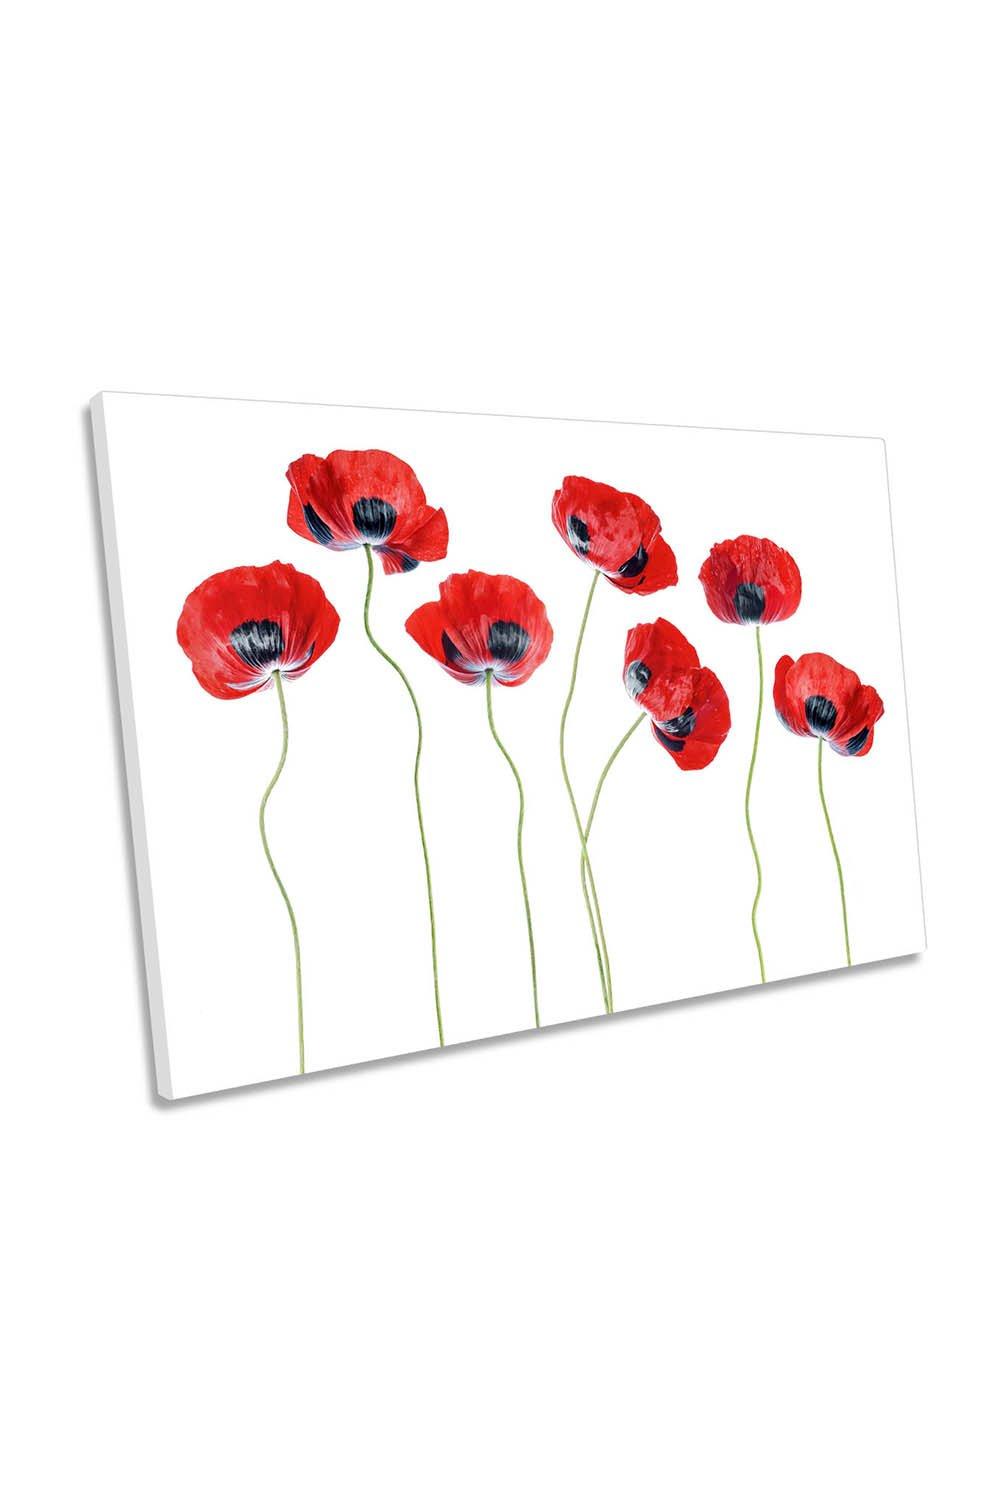 Ladybird Red Poppy Flowers Canvas Wall Art Picture Print